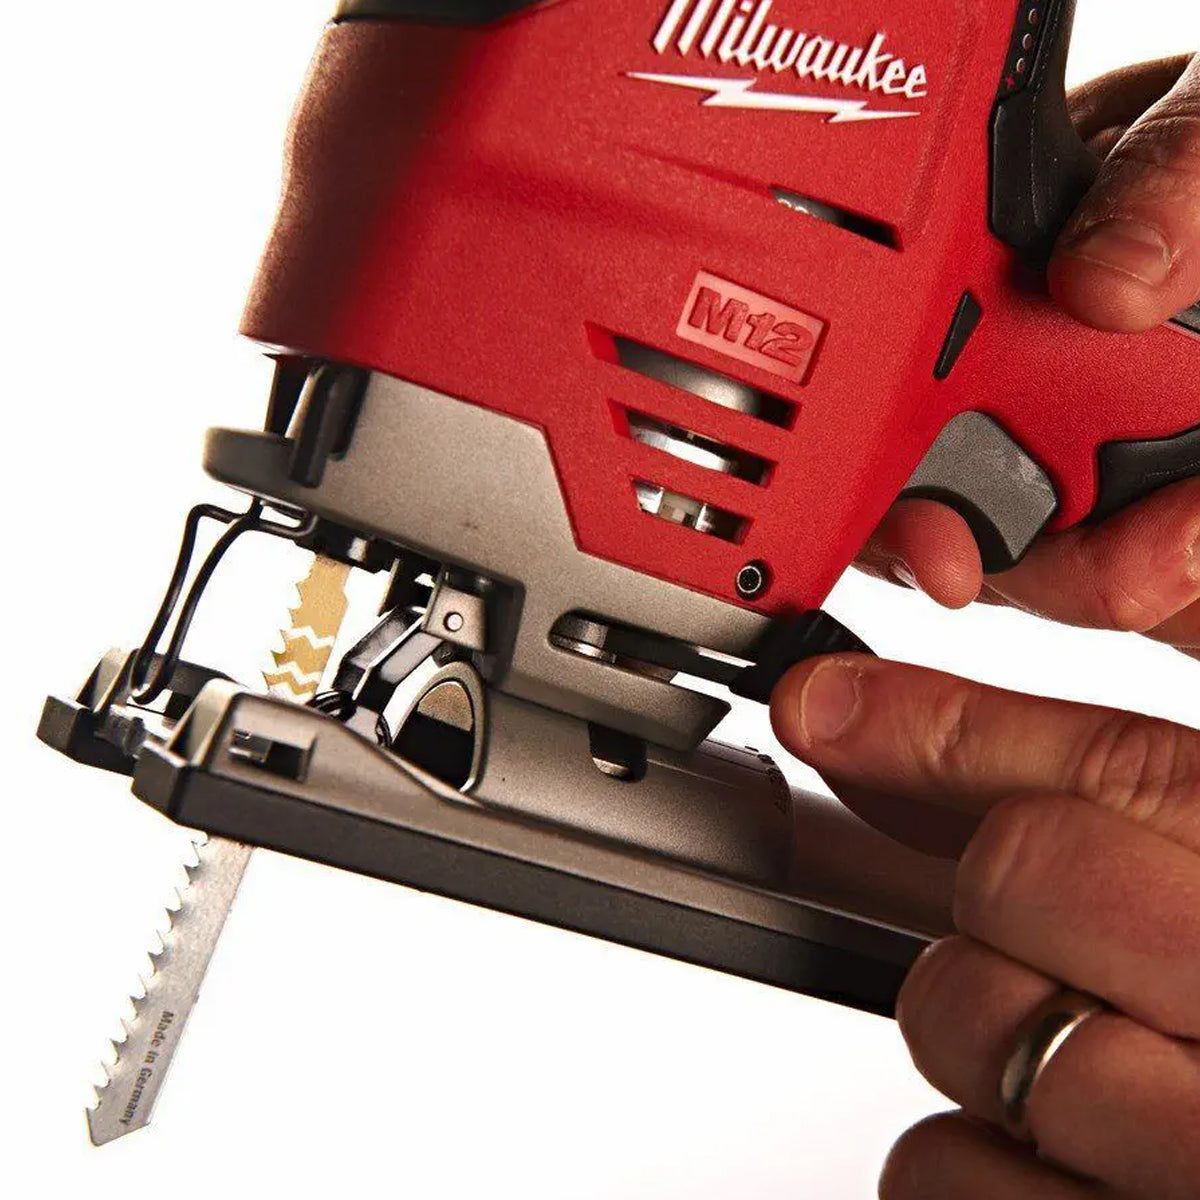 Milwaukee M12JS-0 12V Cordless Compact Jigsaw Body Only